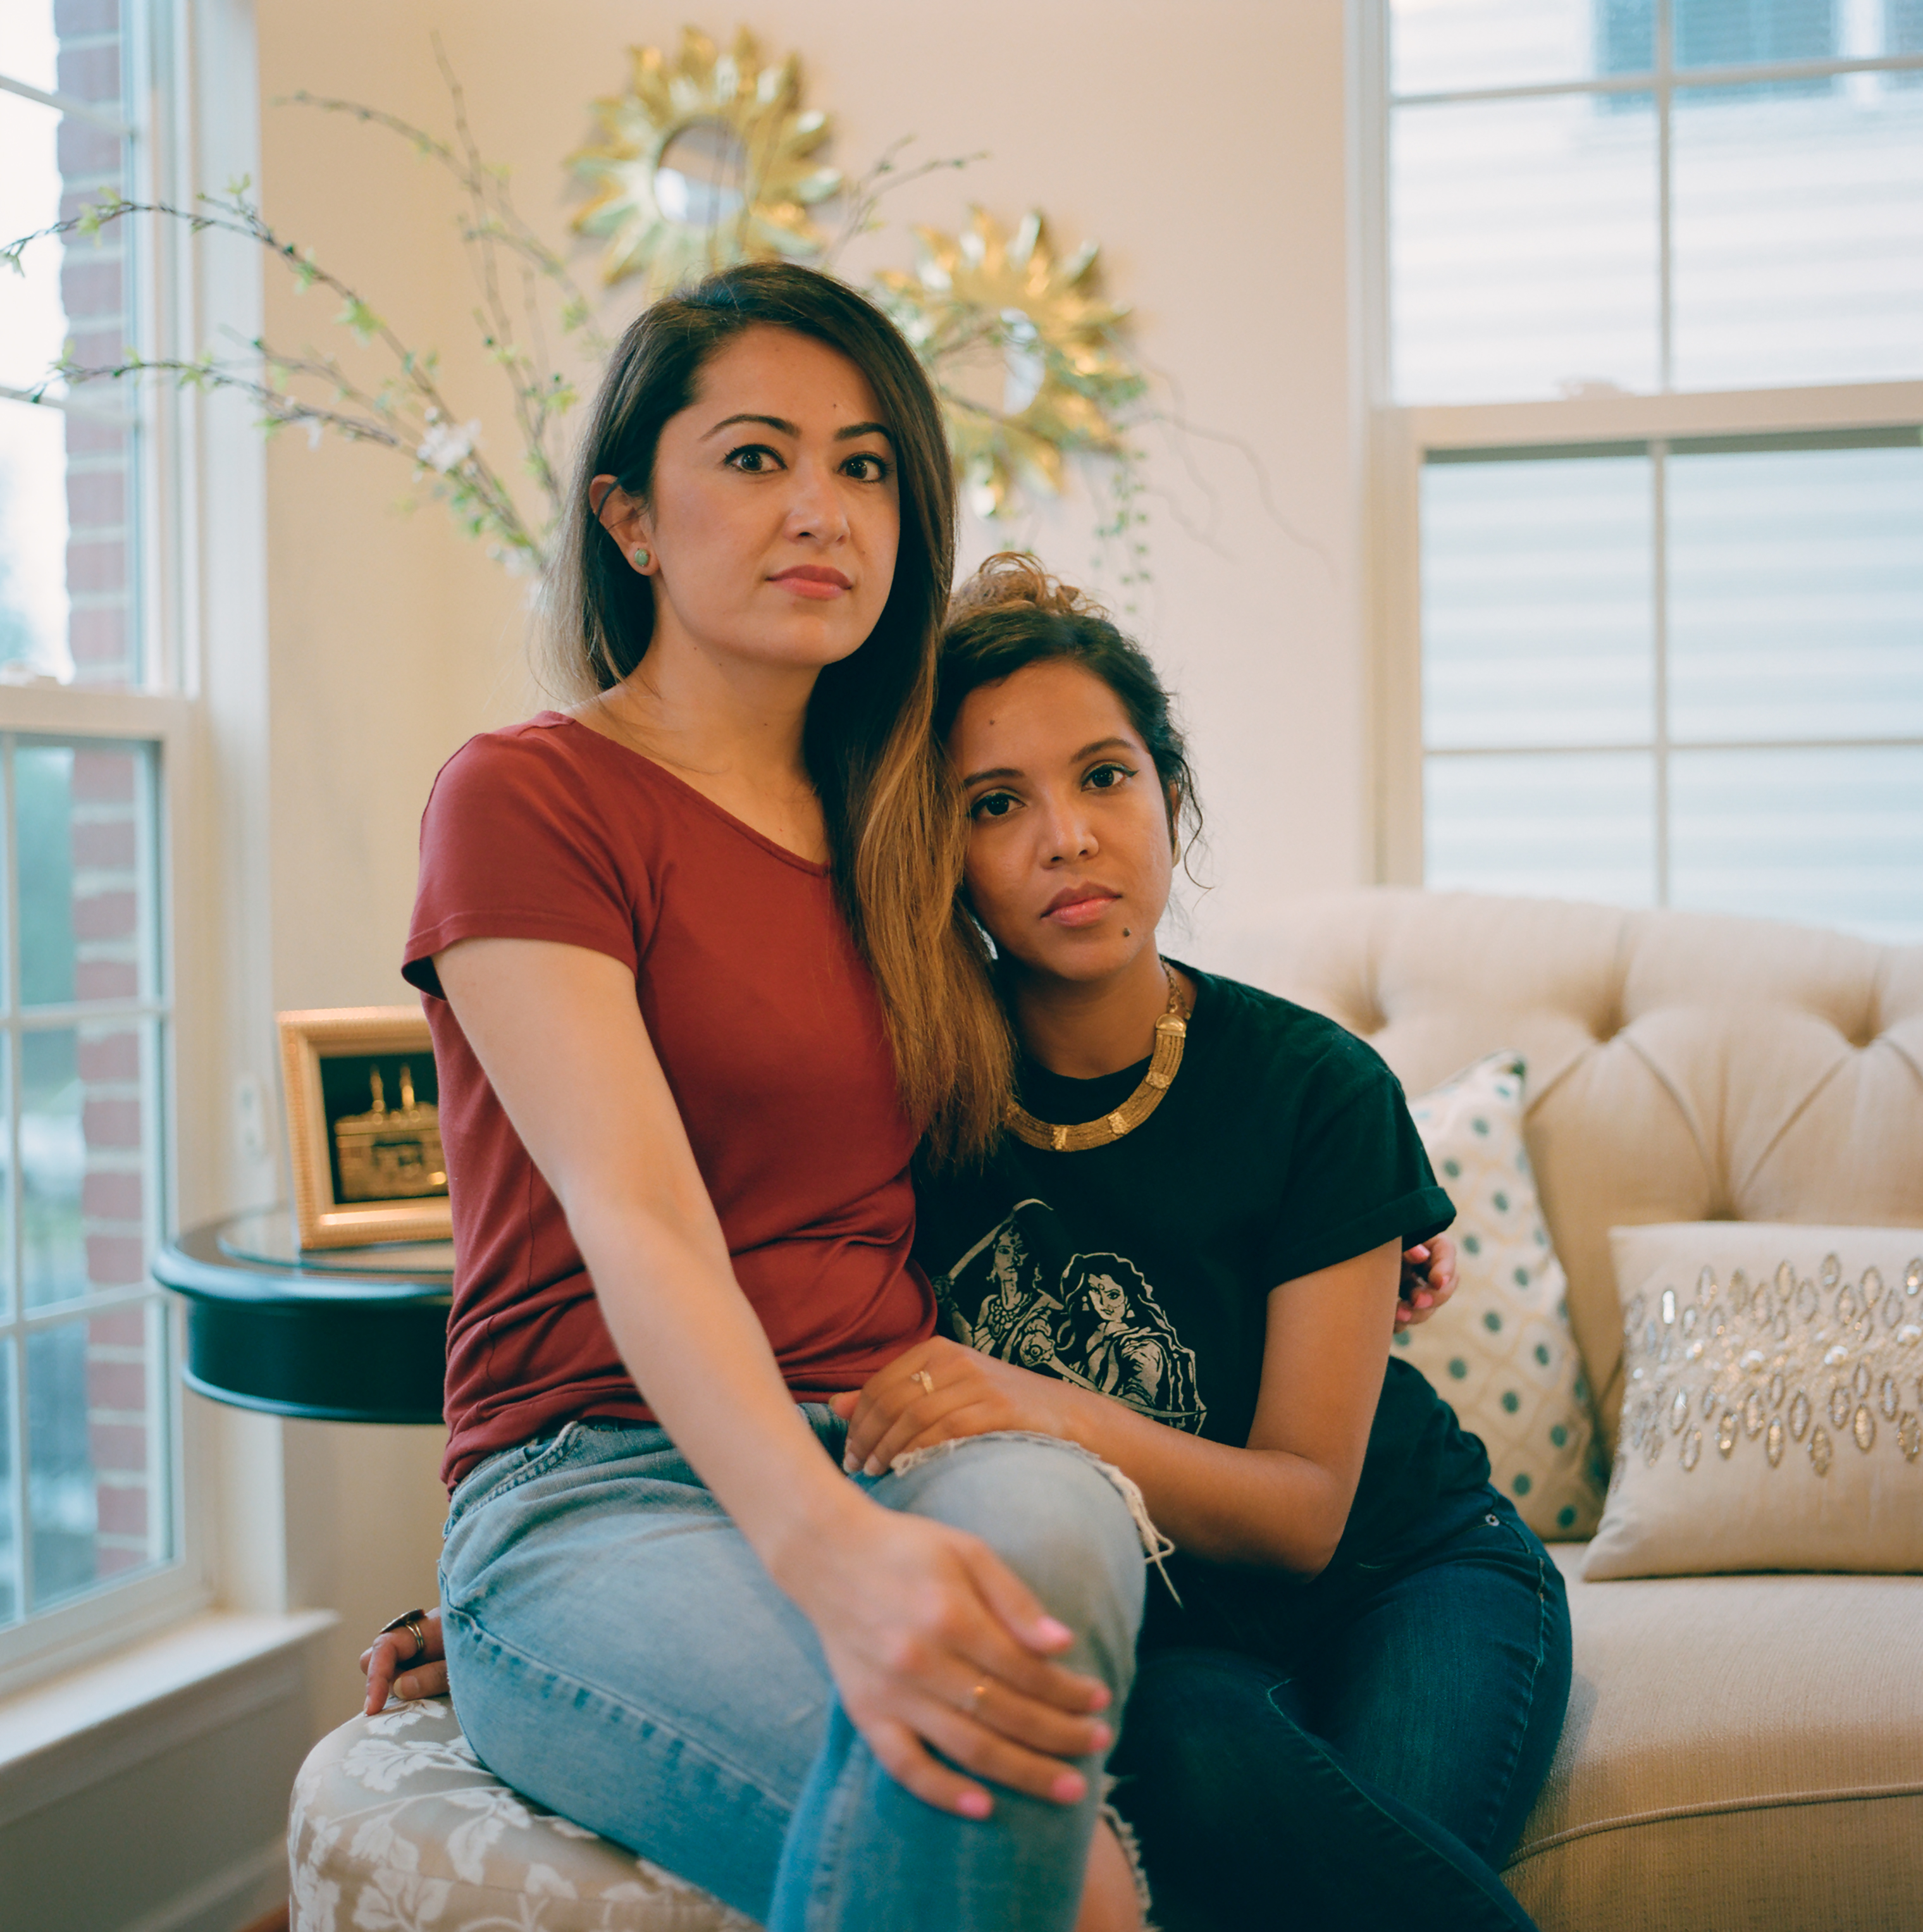 Freshta Mohammad, left, was born in Afghanistan and has worked her way up in the consulting field in the U.S. “I feel like I’ve always lived two lives,” she says. (Miranda Barnes for TIME)